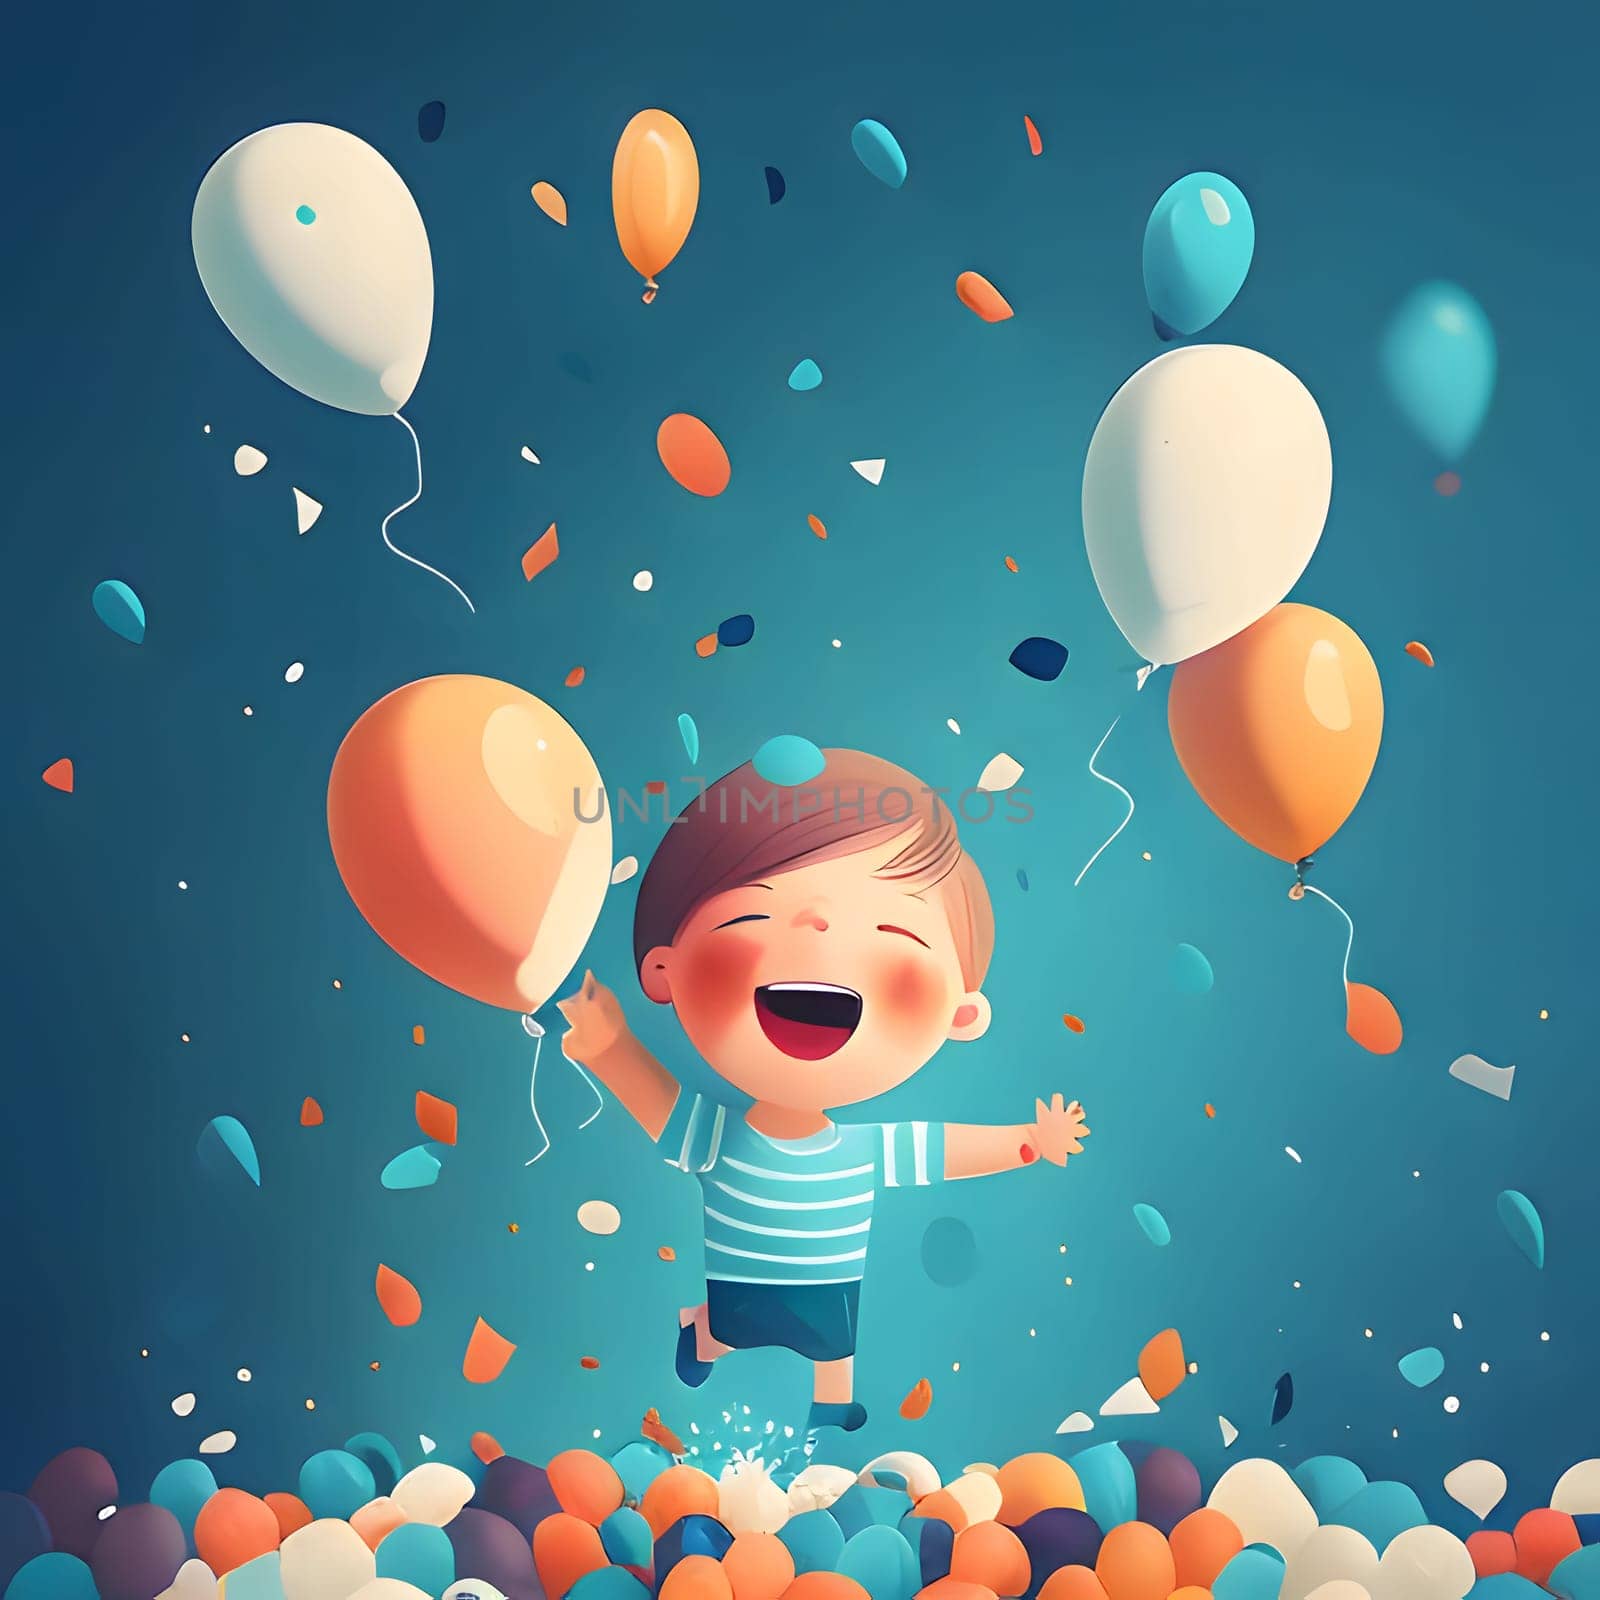 Illustration of a cheerful boy with colorful balloons and confetti on a blue background. New Year's party and celebrations. A time of celebration and resolutions.